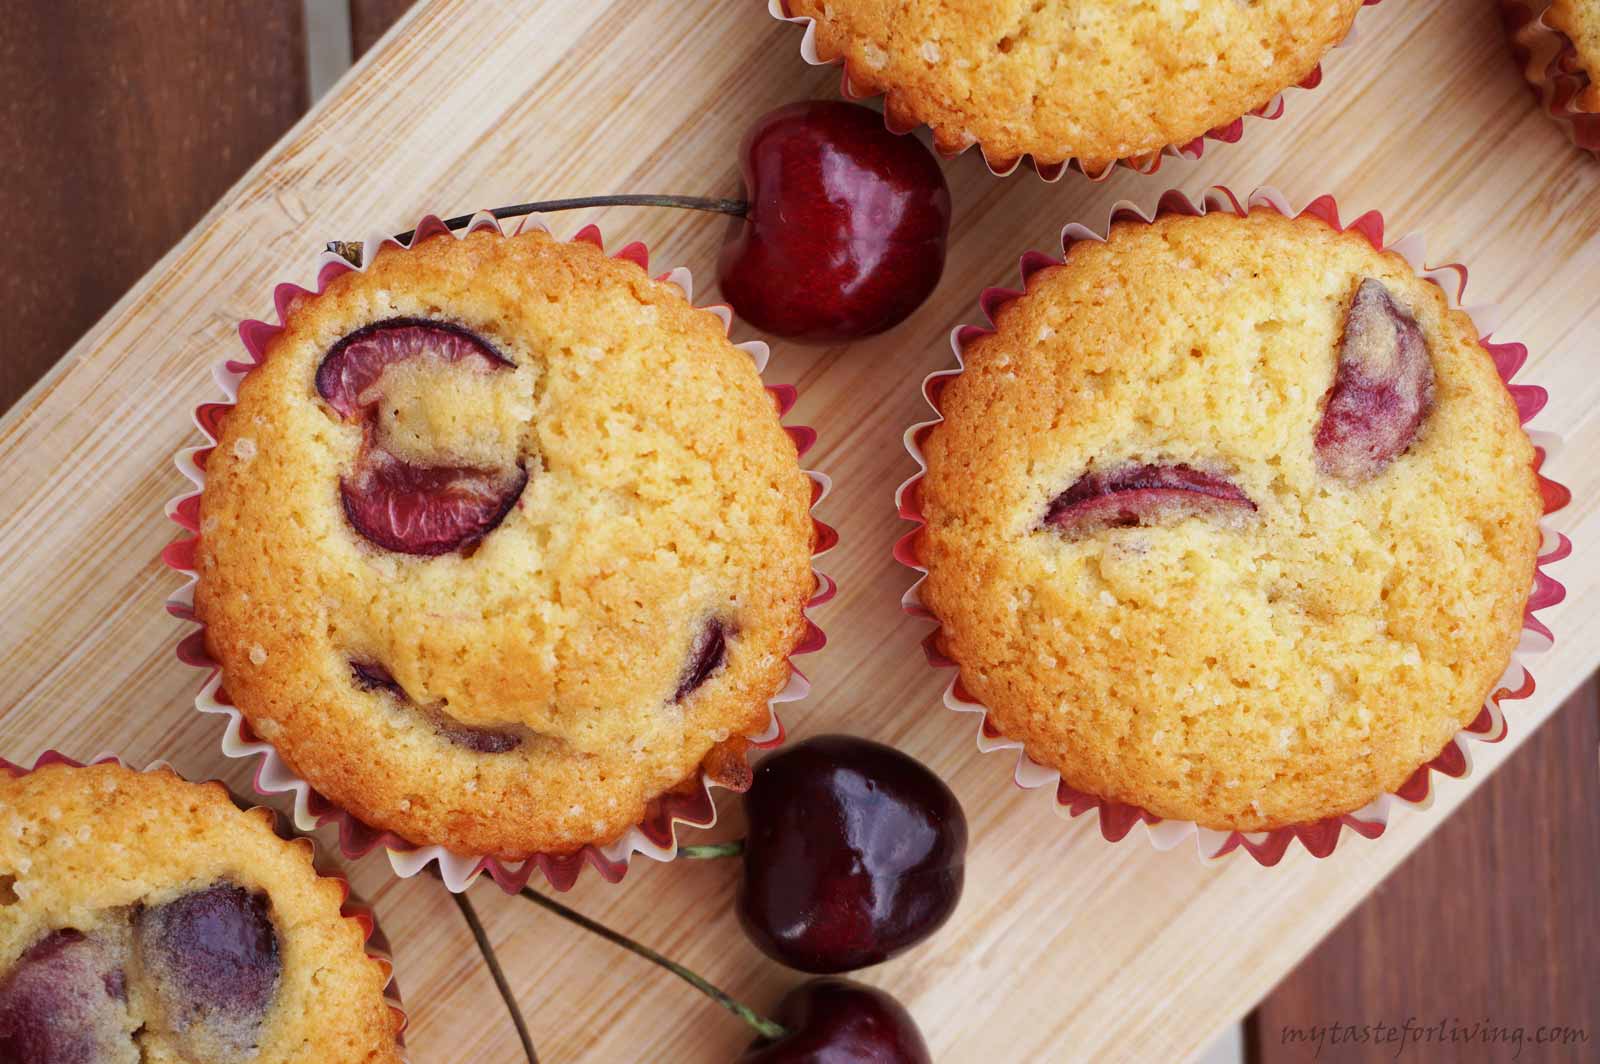 You should try this cherry muffins, which are quick to prepare and irresistibly delicious.